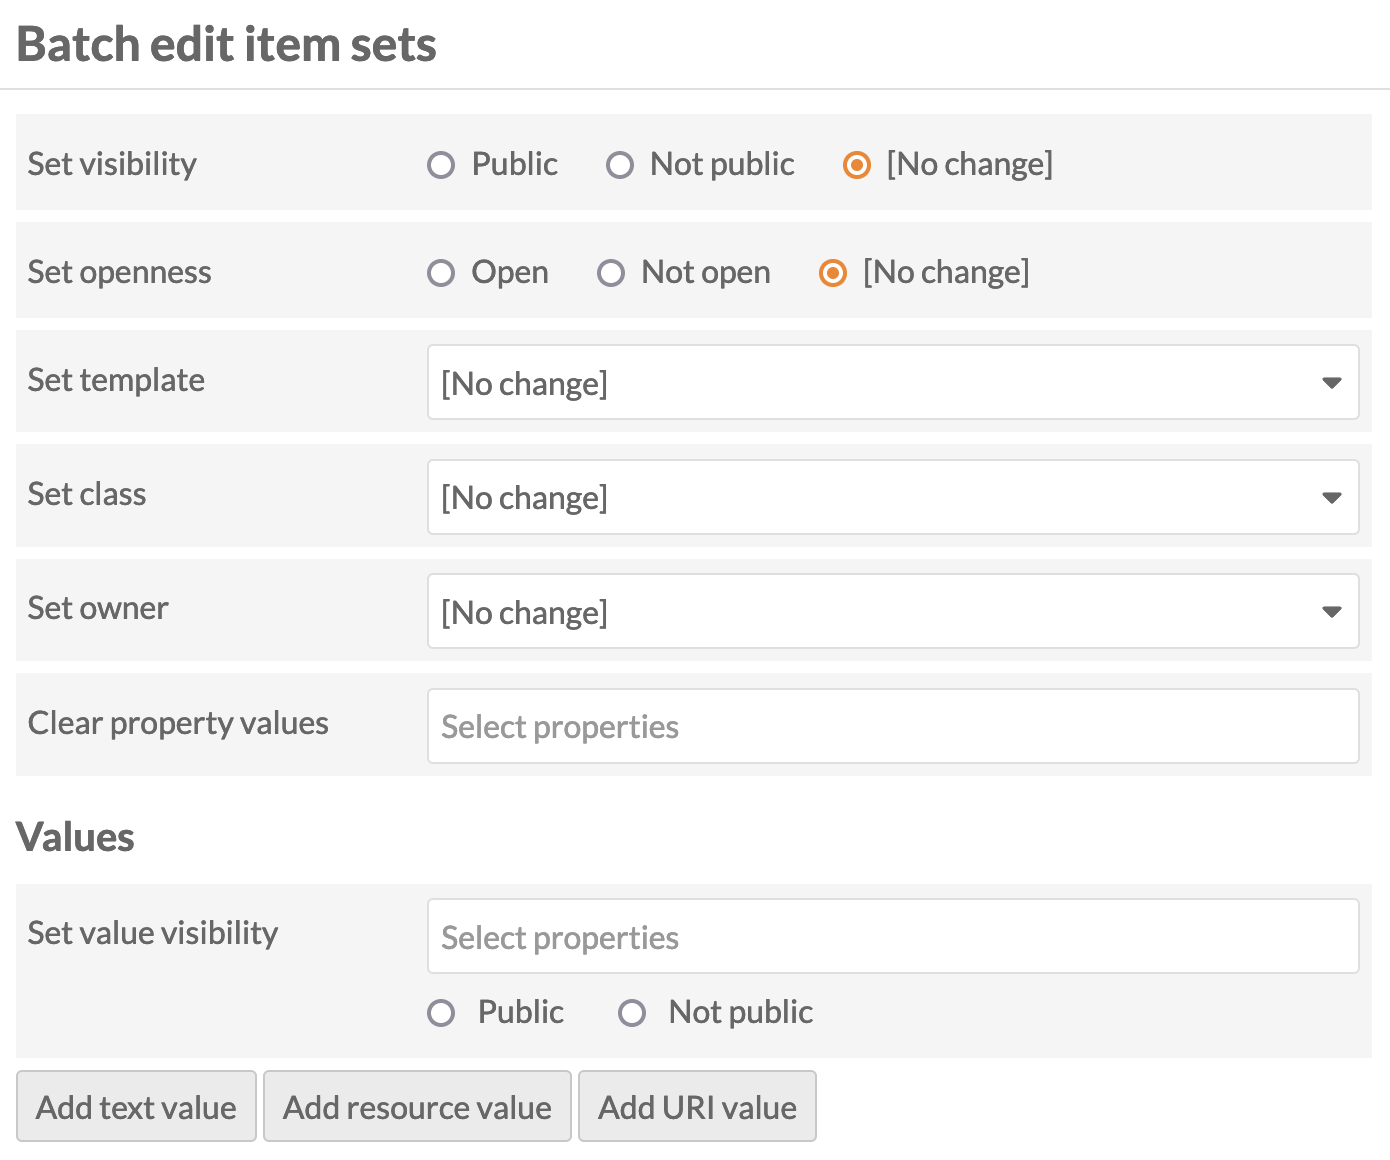 Batch edit items form, with options as described above. Everything is grayscale